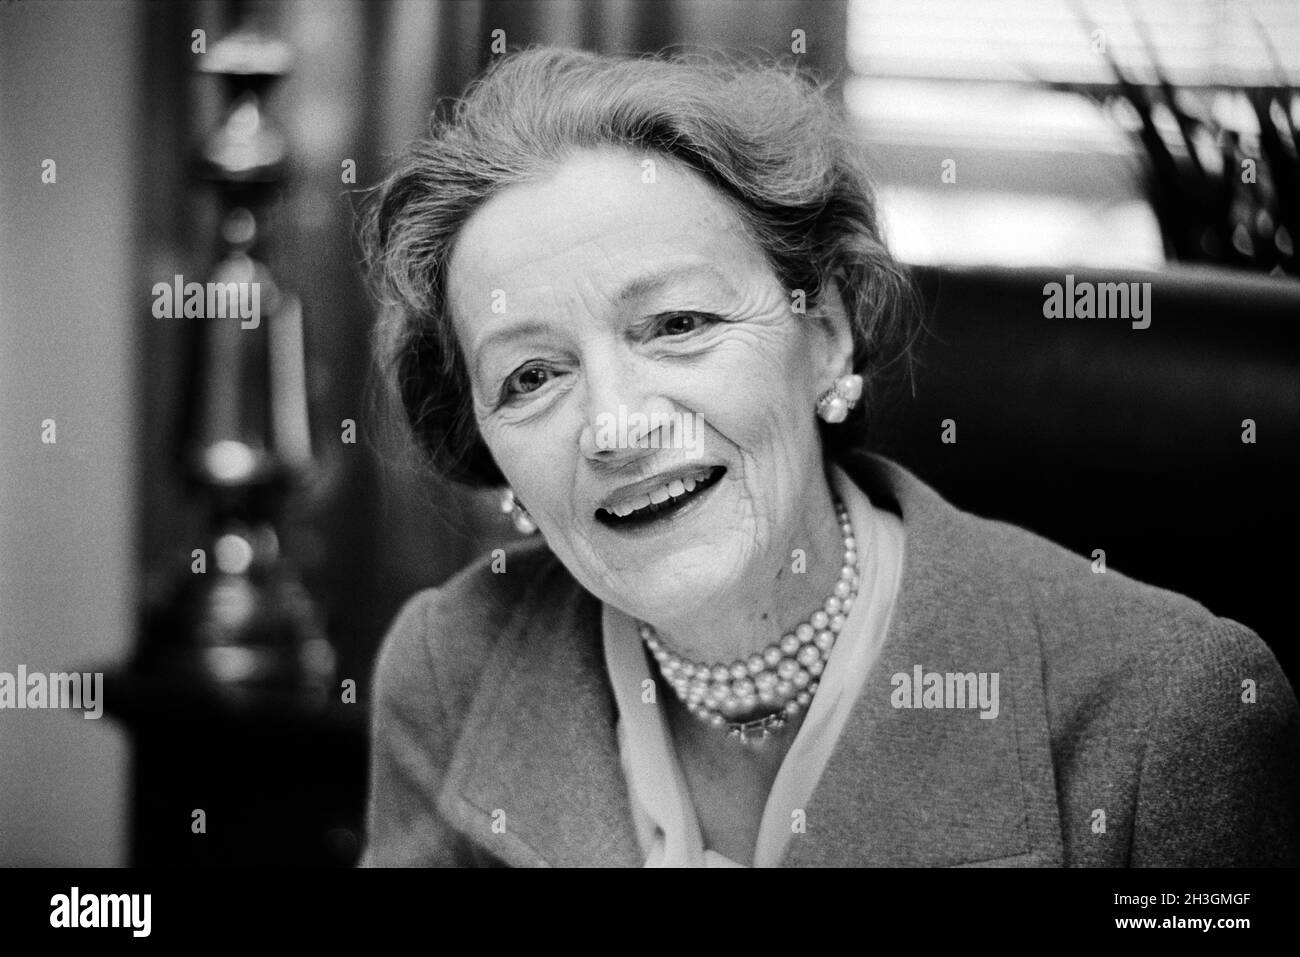 Millicent Fenwick (1910-1992), American Politician and Diplomat, head and shoulders Portrait as member of U.S. House of Representatives from New Jersey's 5th District, Thomas J. O'Halloran, US News & World Report Magazine Collection, February 6, 1975 Stock Photo